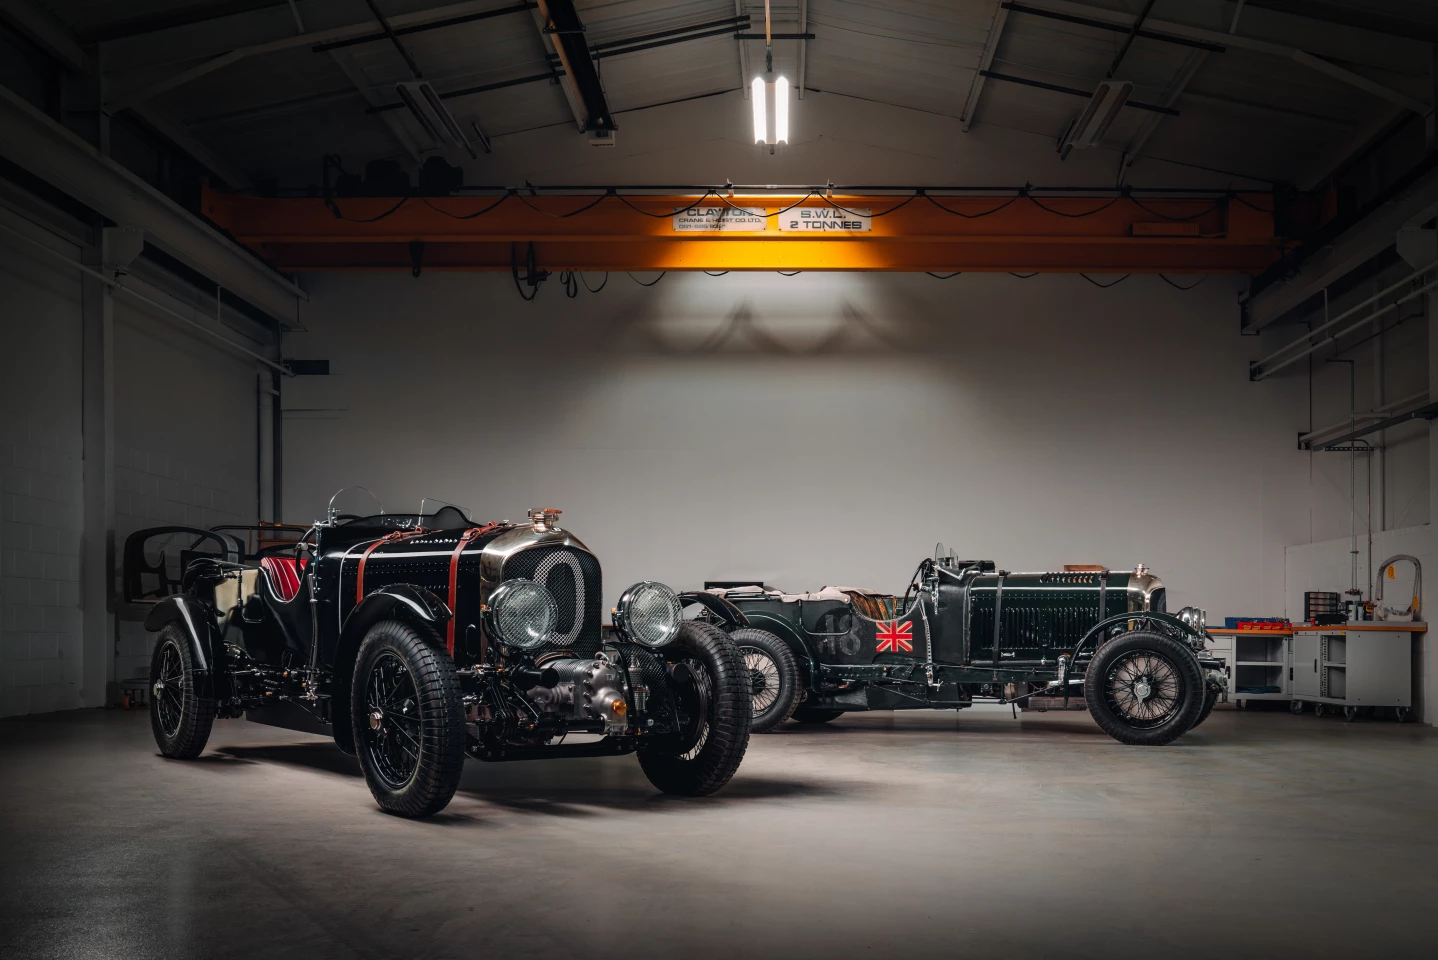 Bentley Made Replica of The Classic Blower 1929 Racer Car